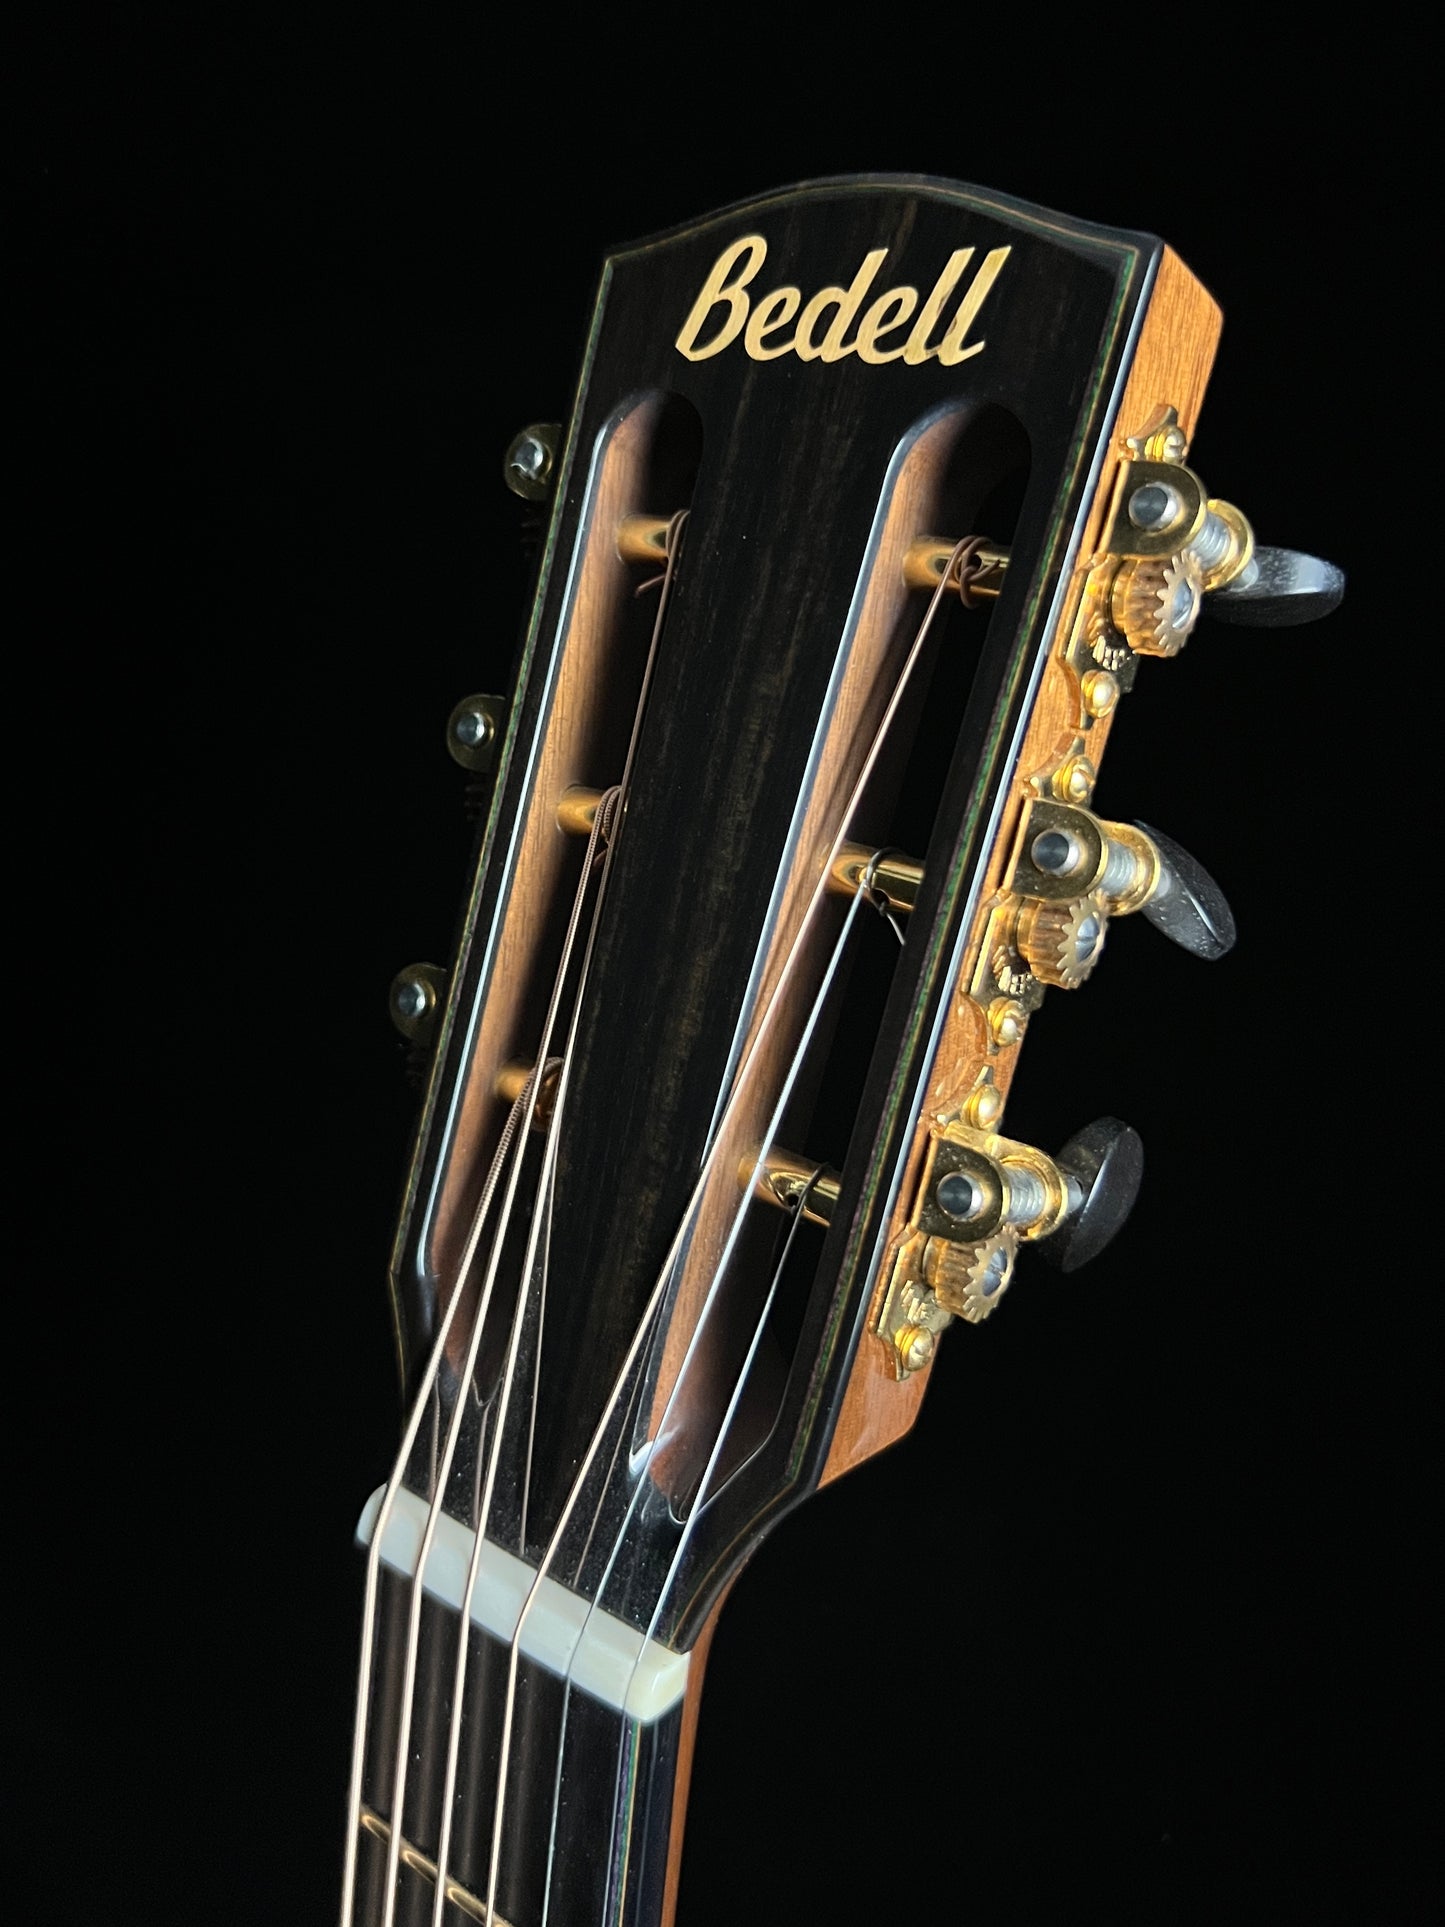 Bedell Pele Parlor Koa Limited Edition Acoustic Guitar #2 out of 12 - Consignment